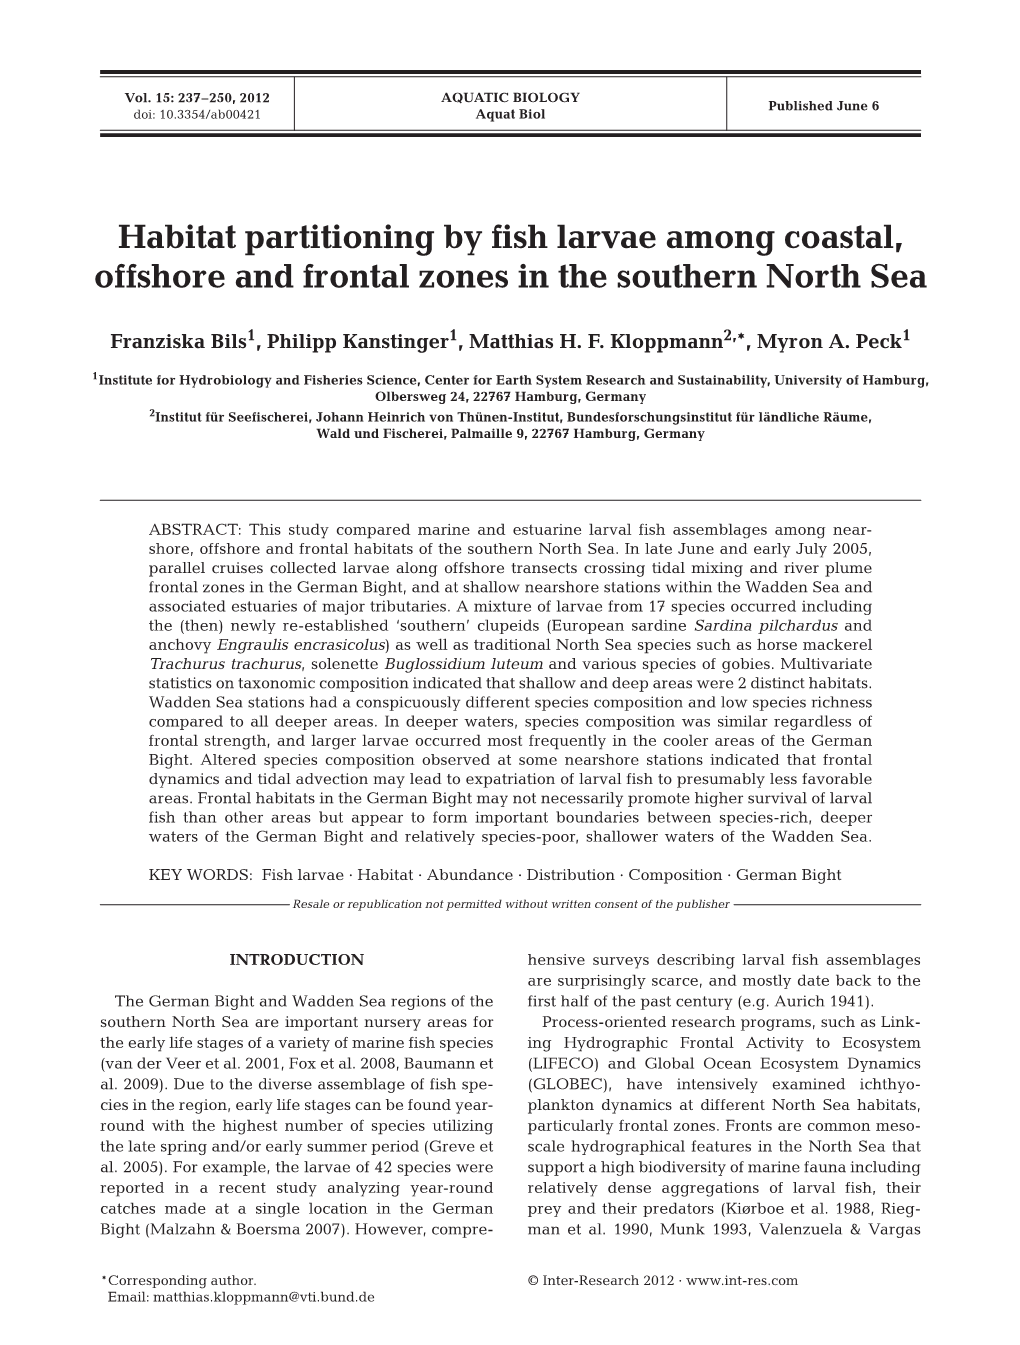 Habitat Partitioning by Fish Larvae Among Coastal, Offshore and Frontal Zones in the Southern North Sea